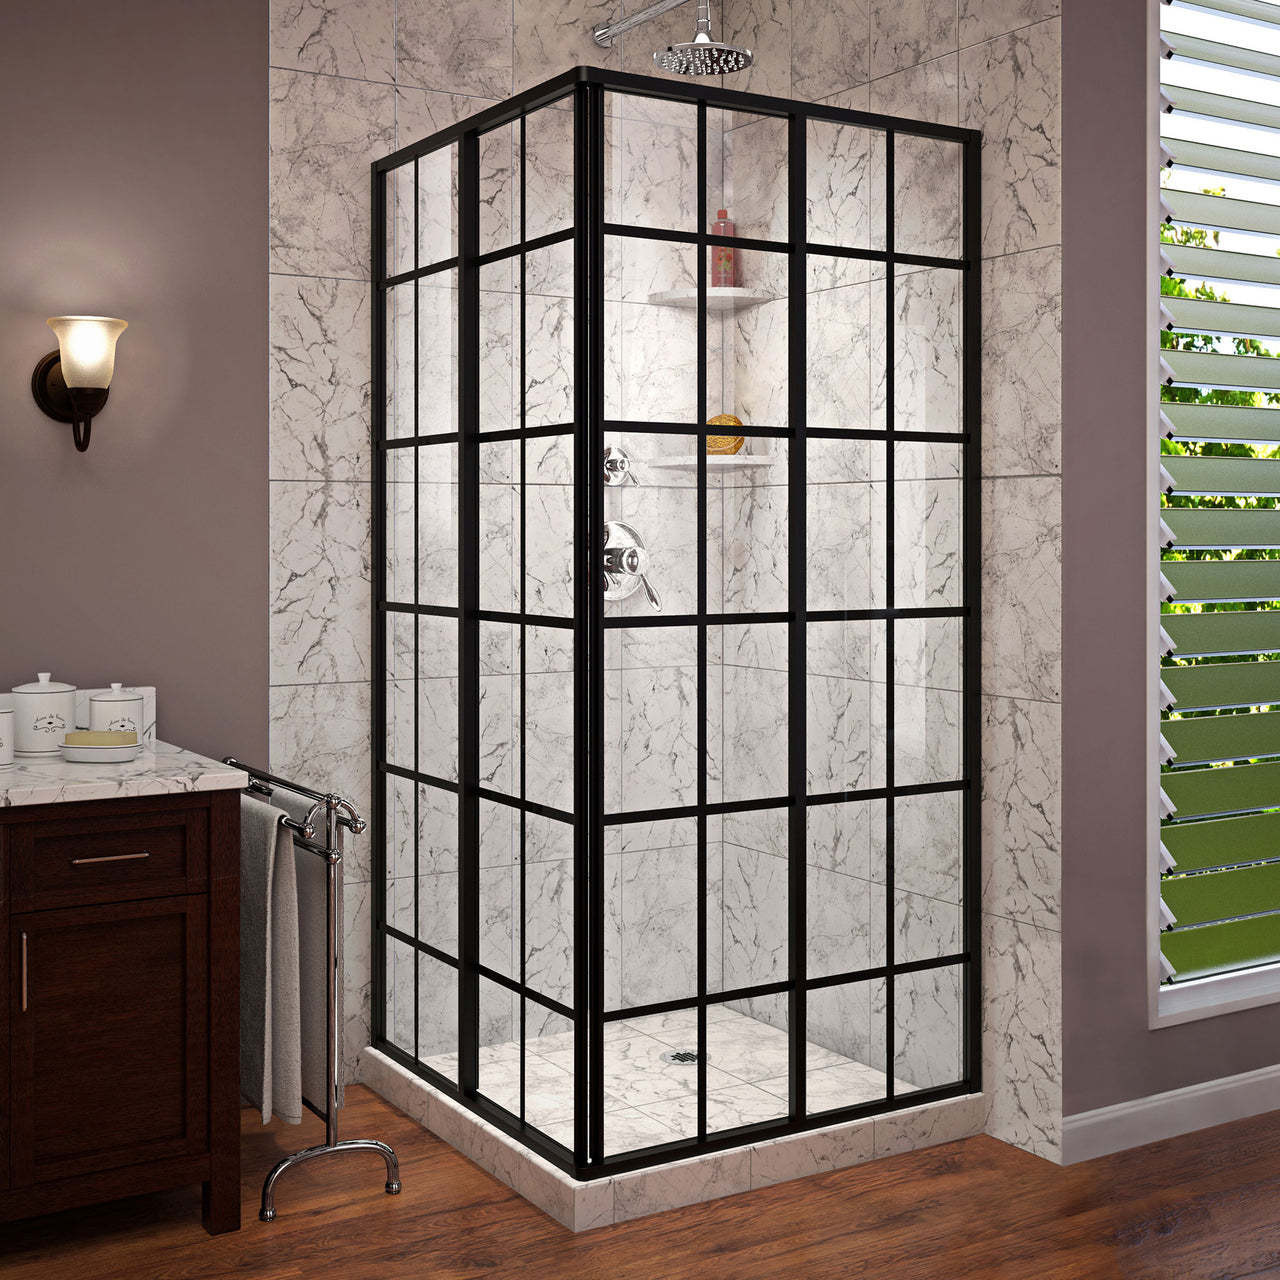 DreamLine French Corner 40 1/2 in. D x 40 1/2 in. W x 72 in. H Framed Sliding Shower Enclosure - BNGBath